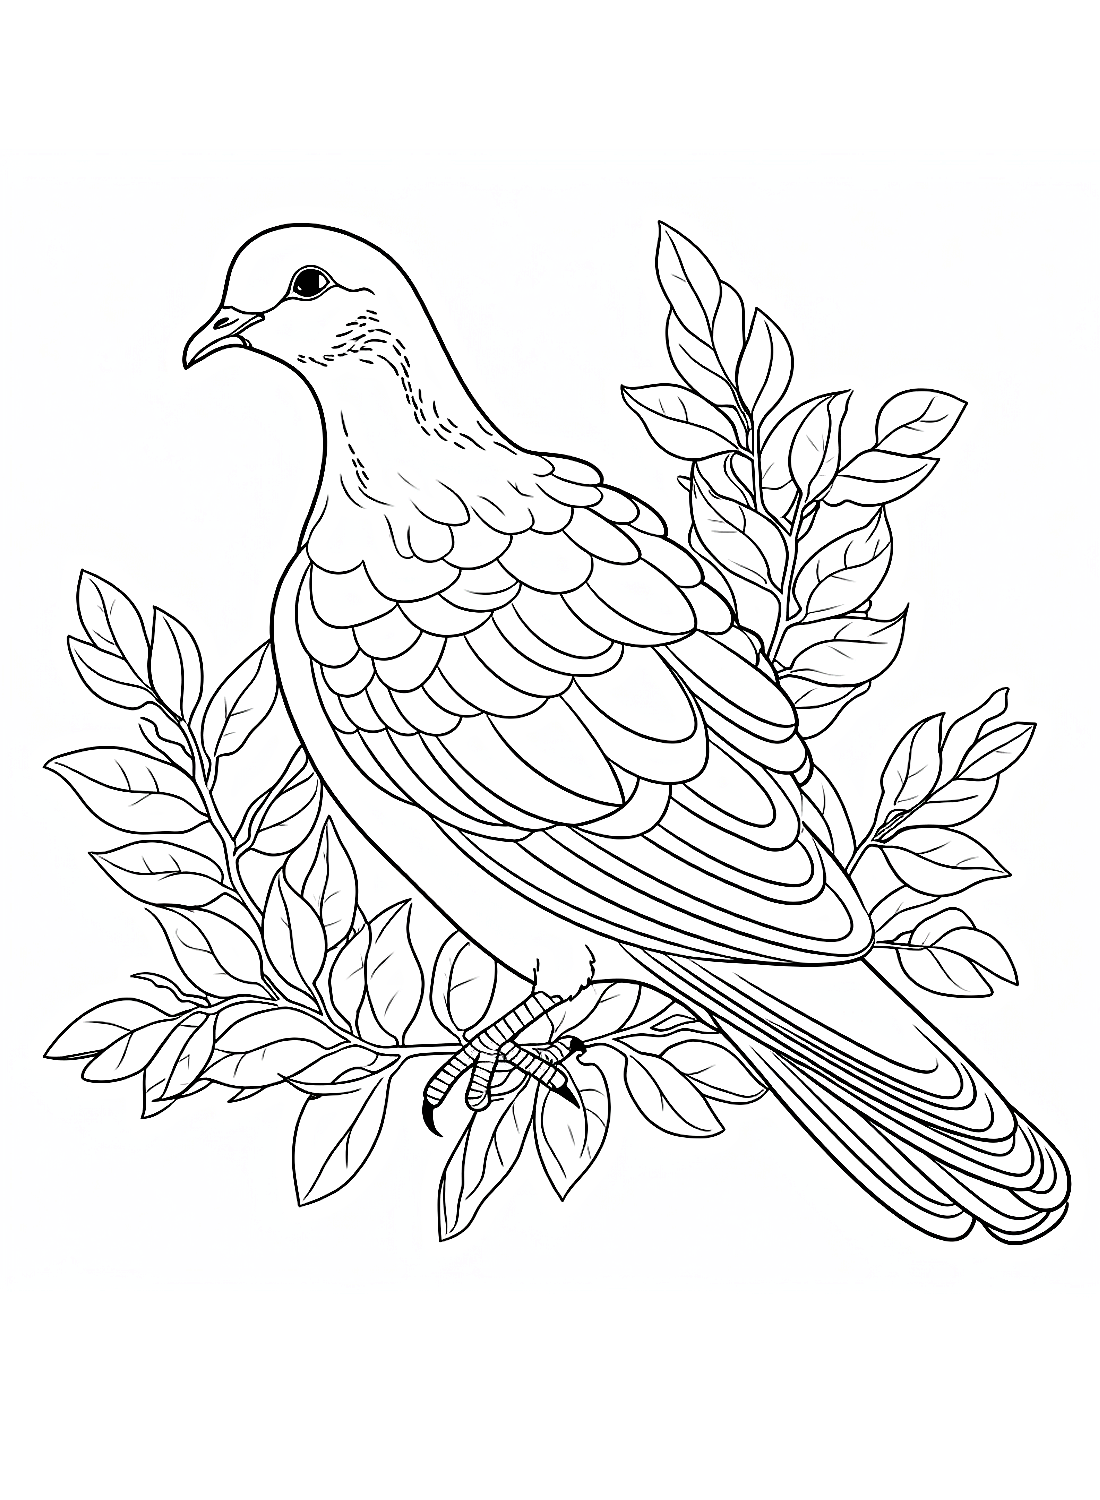 The dove Coloring Page